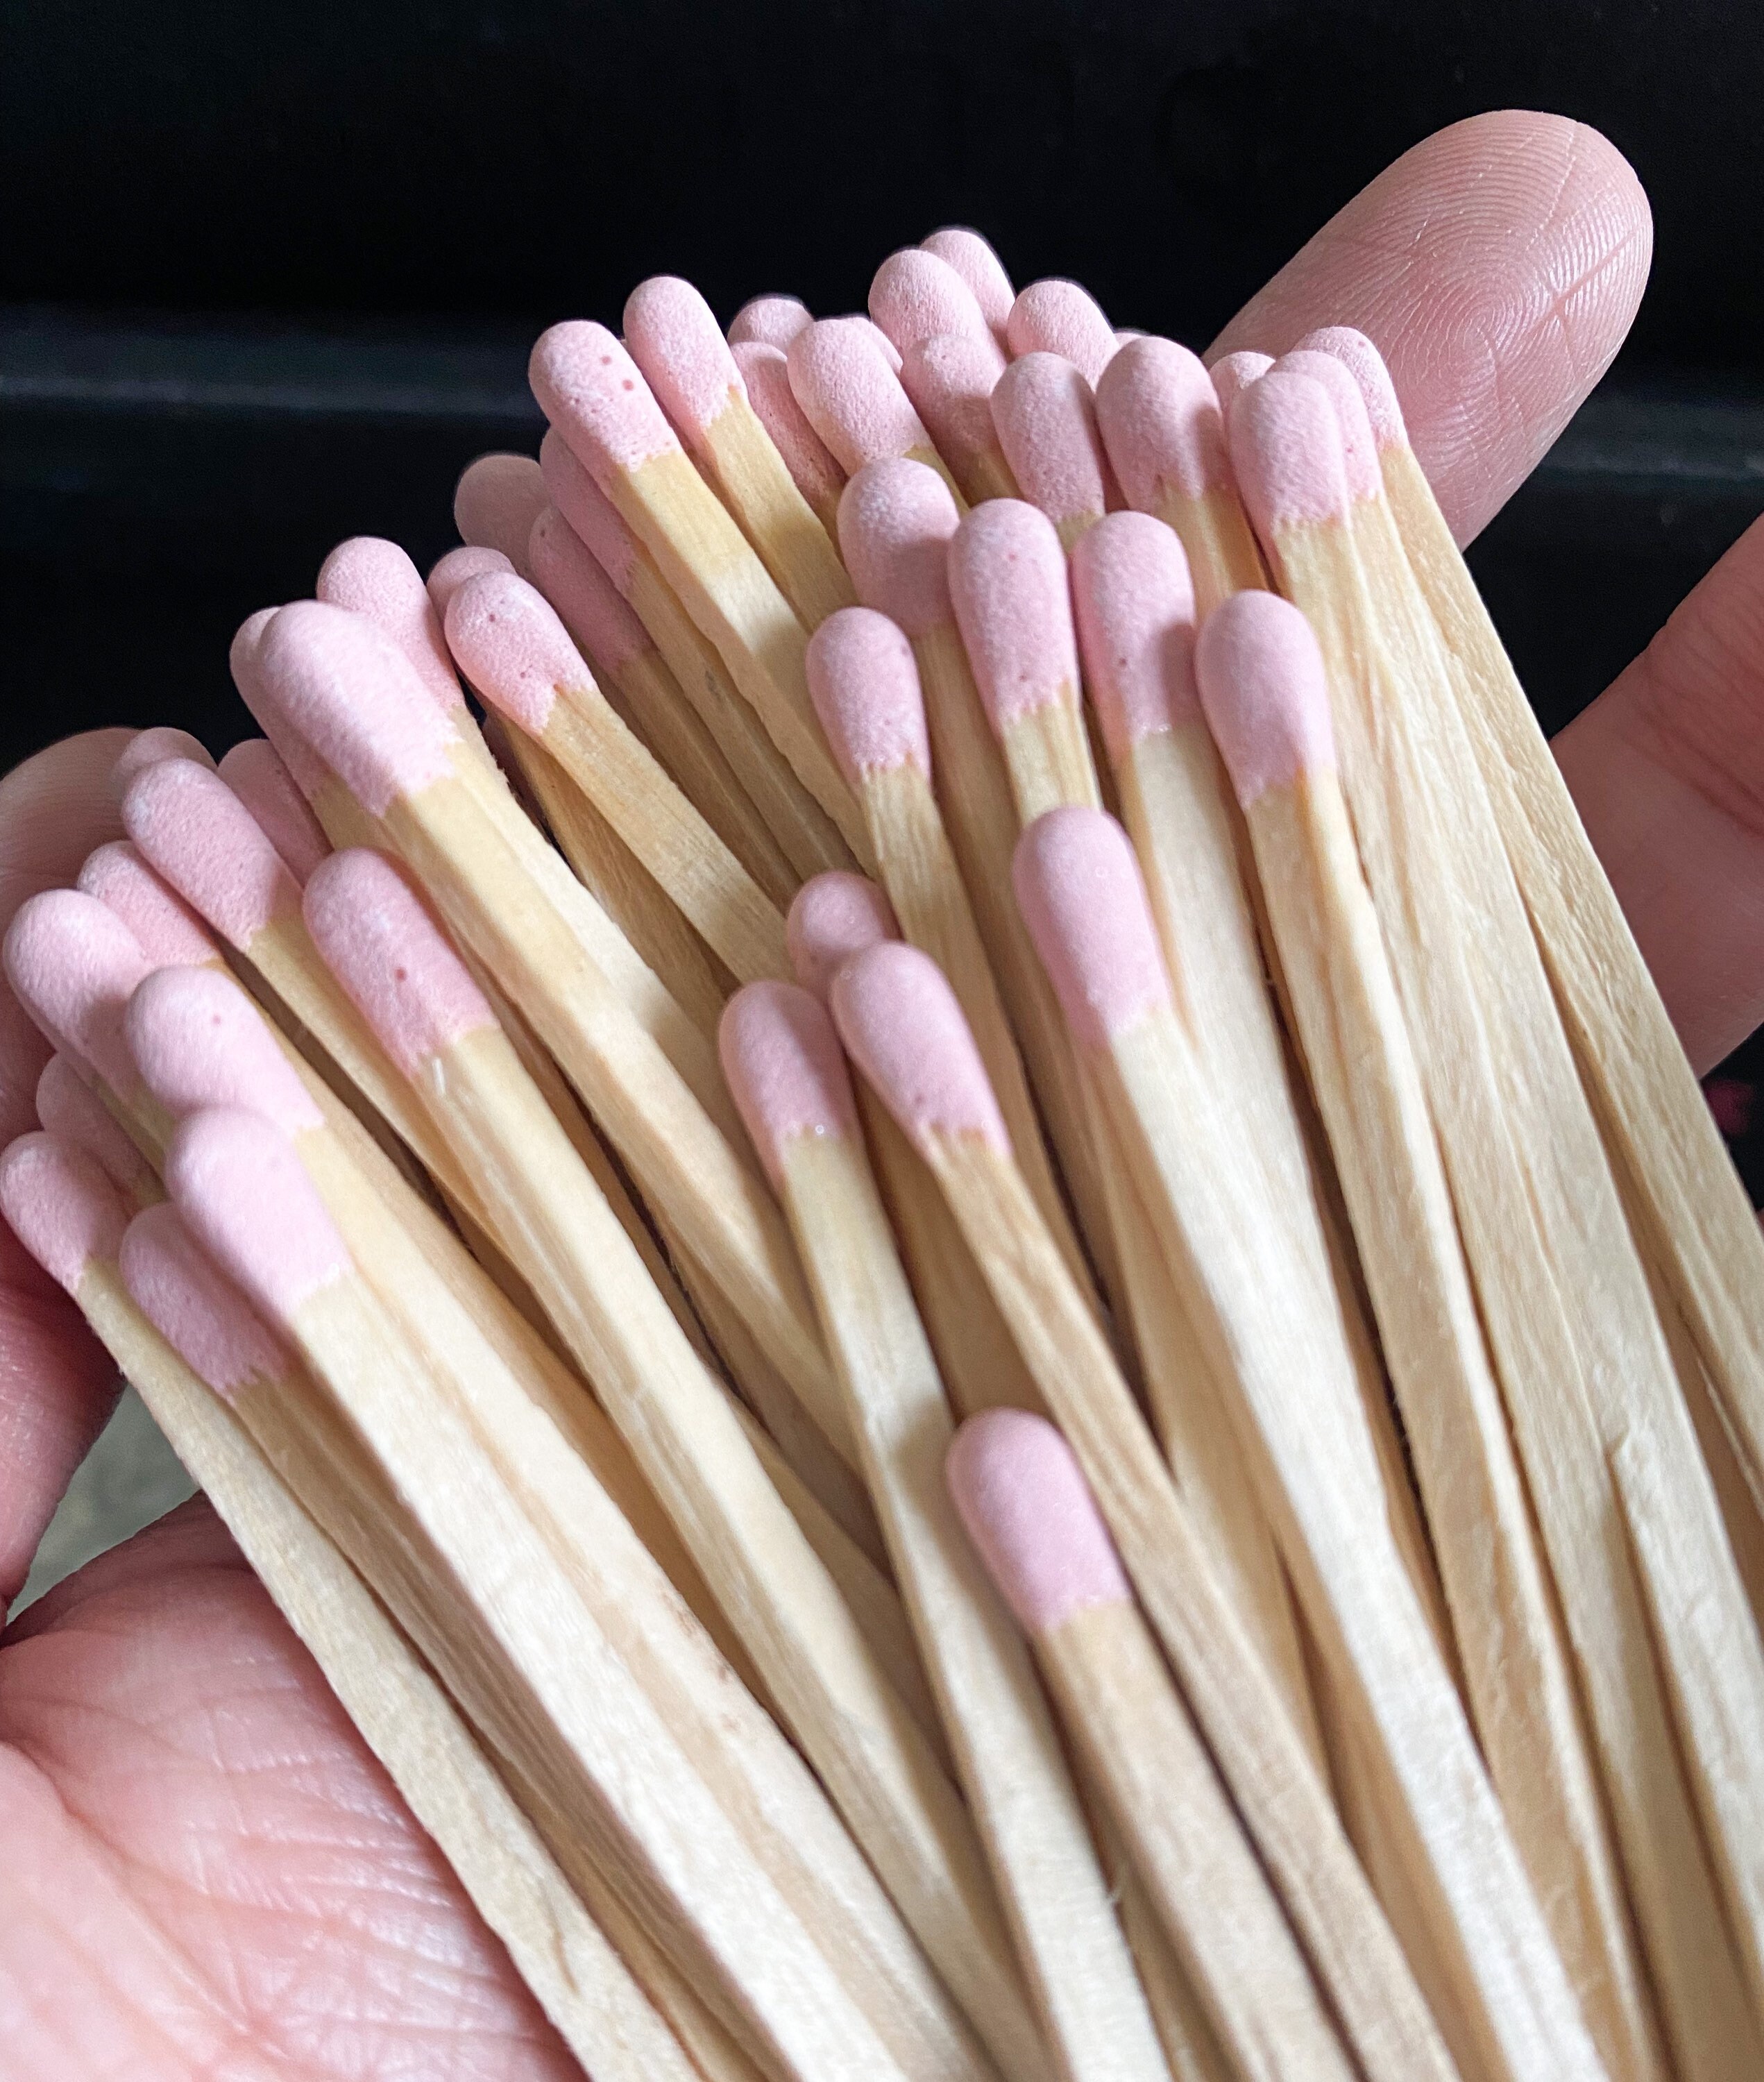 2 Light Pink Tip Safety Matches | Set of 100+ Bulk Artisan Matchsticks  with Striker Stickers by Thankful Greetings | Decorative & Unique Candle